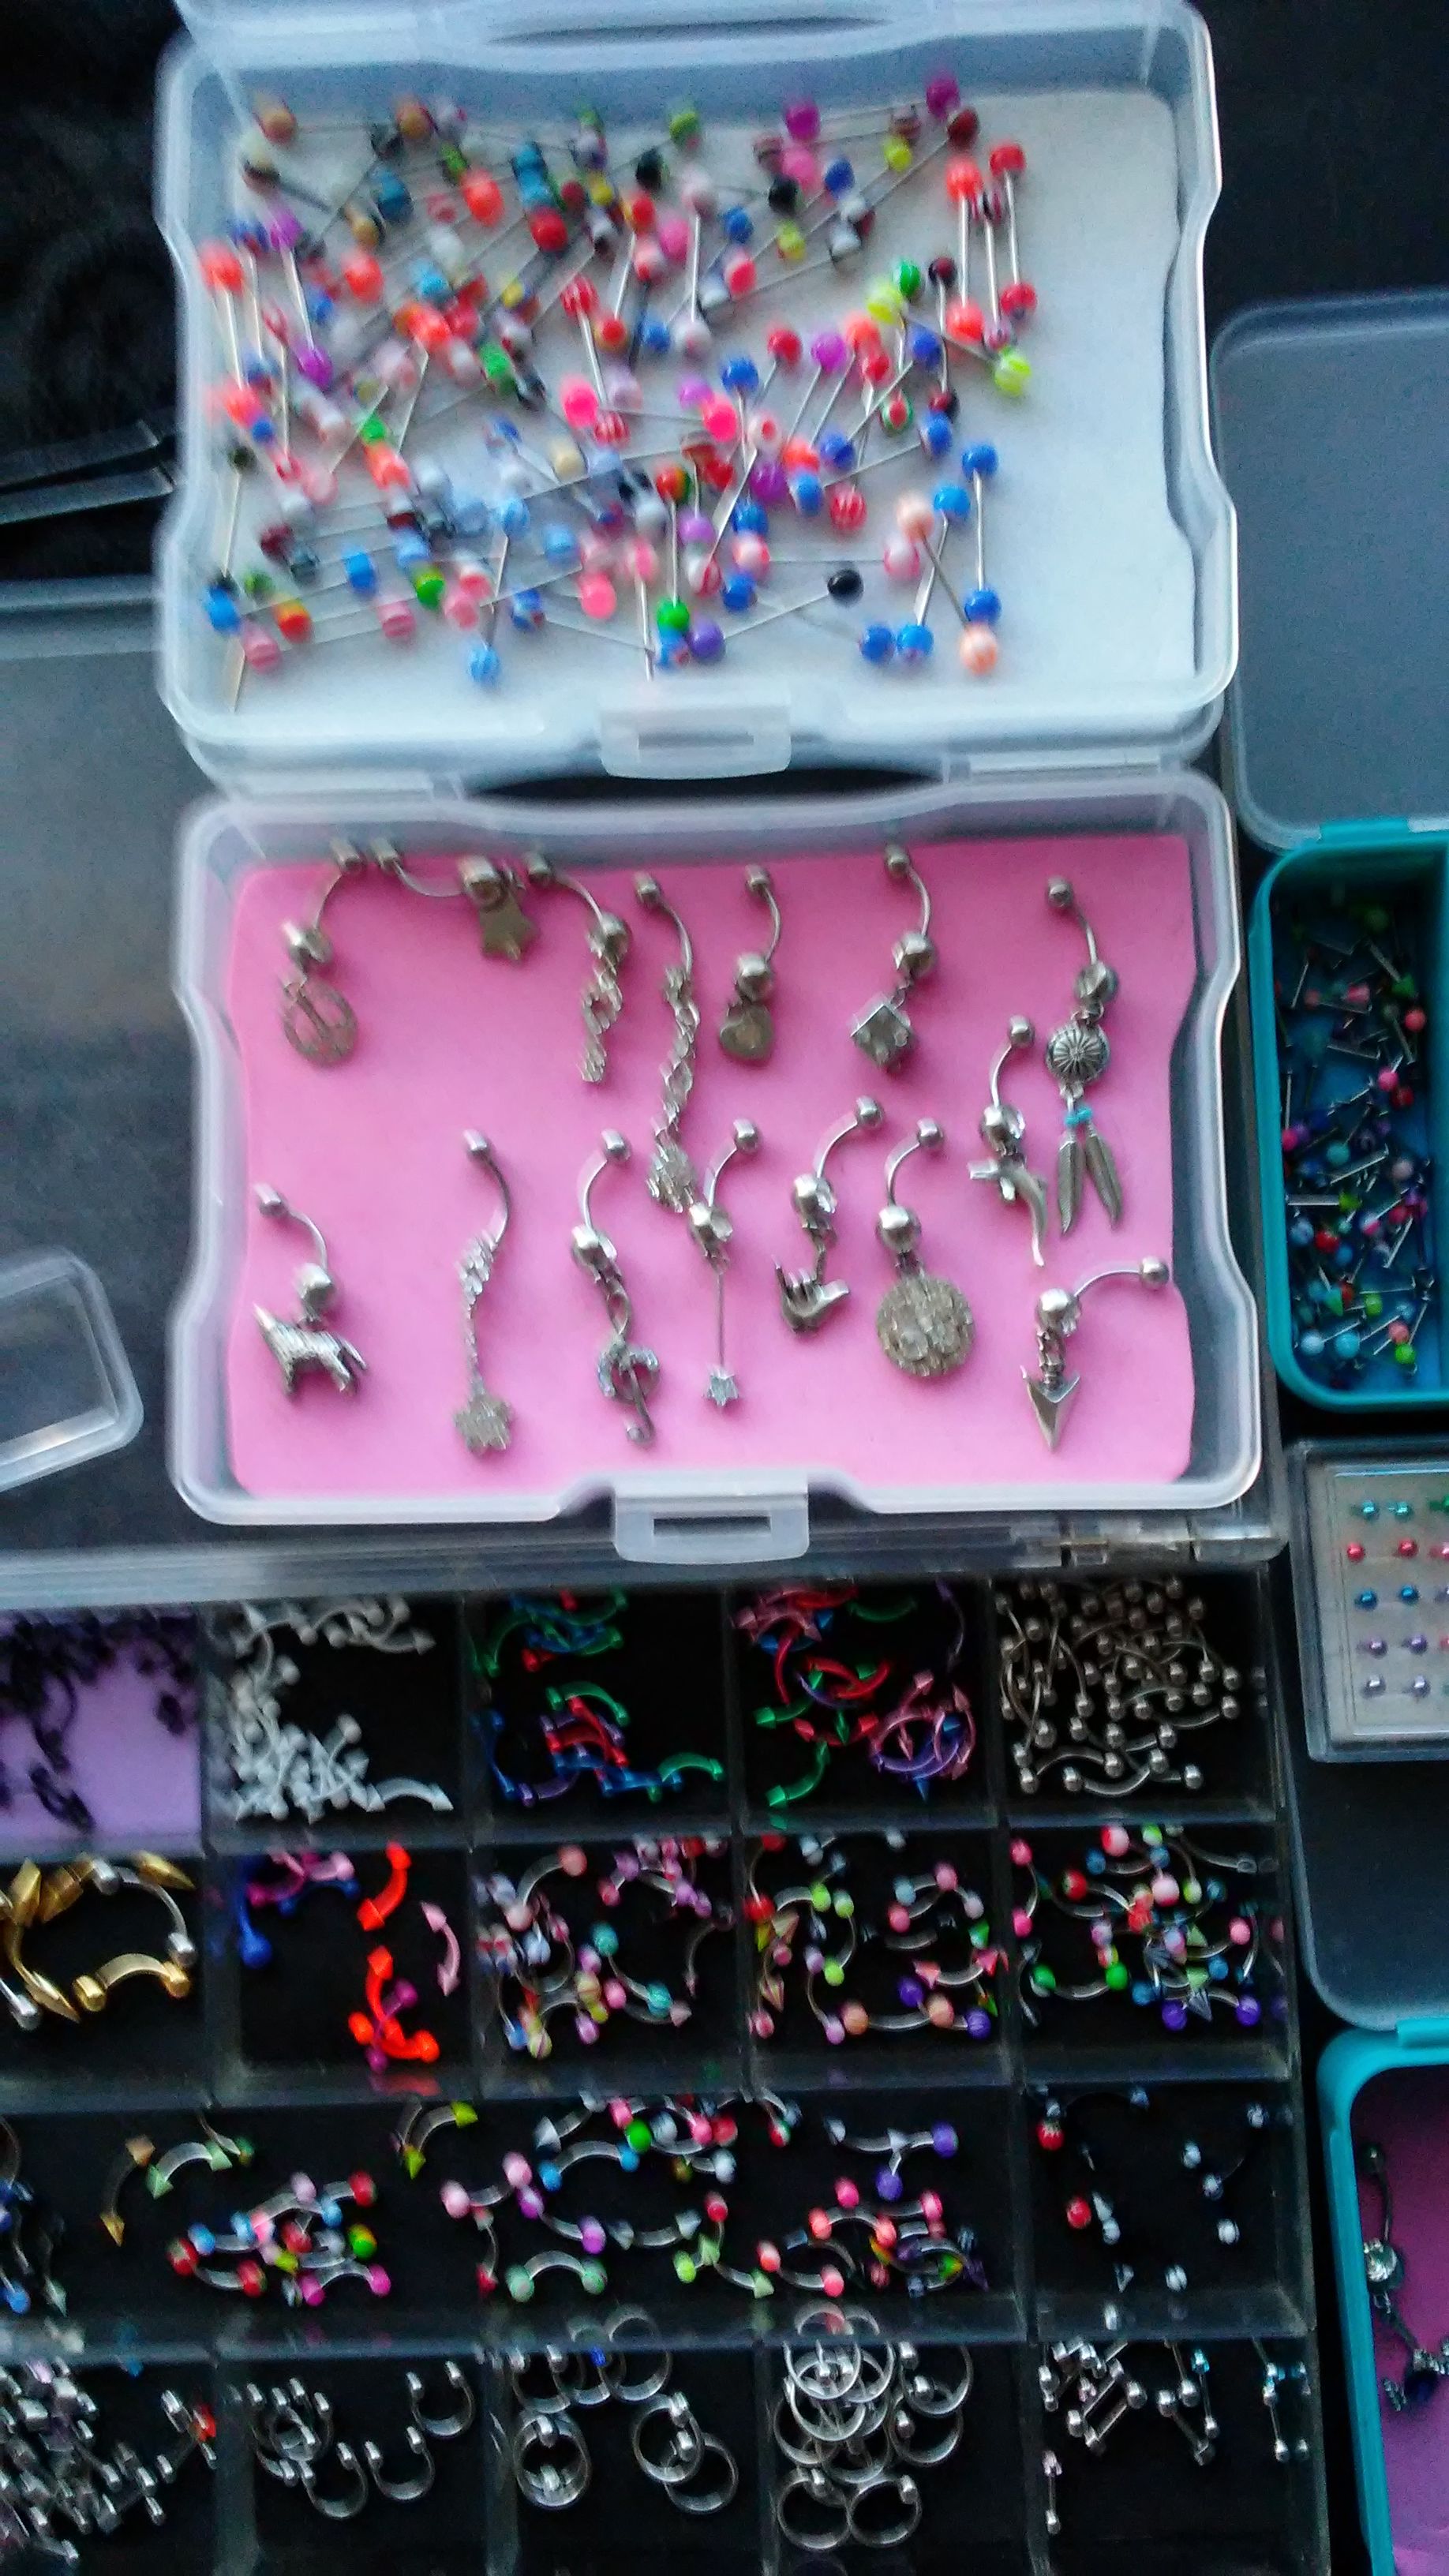 Awesome deal over 1,000 pieces of body jewelry of All Sorts brand new take all $200 special